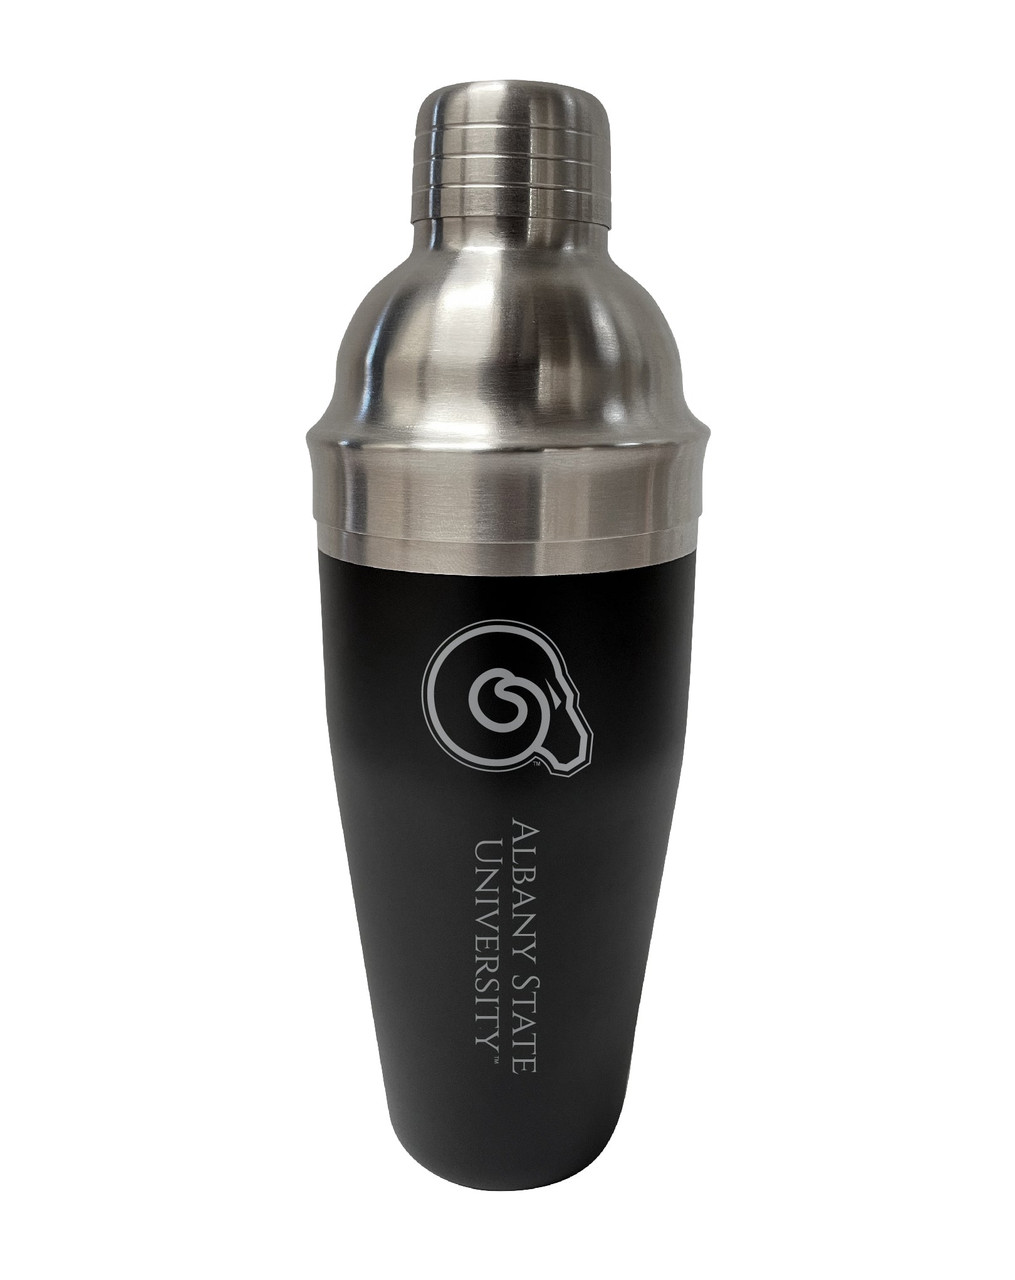 Albany State University 24 oz Stainless Steel Cocktail Shaker